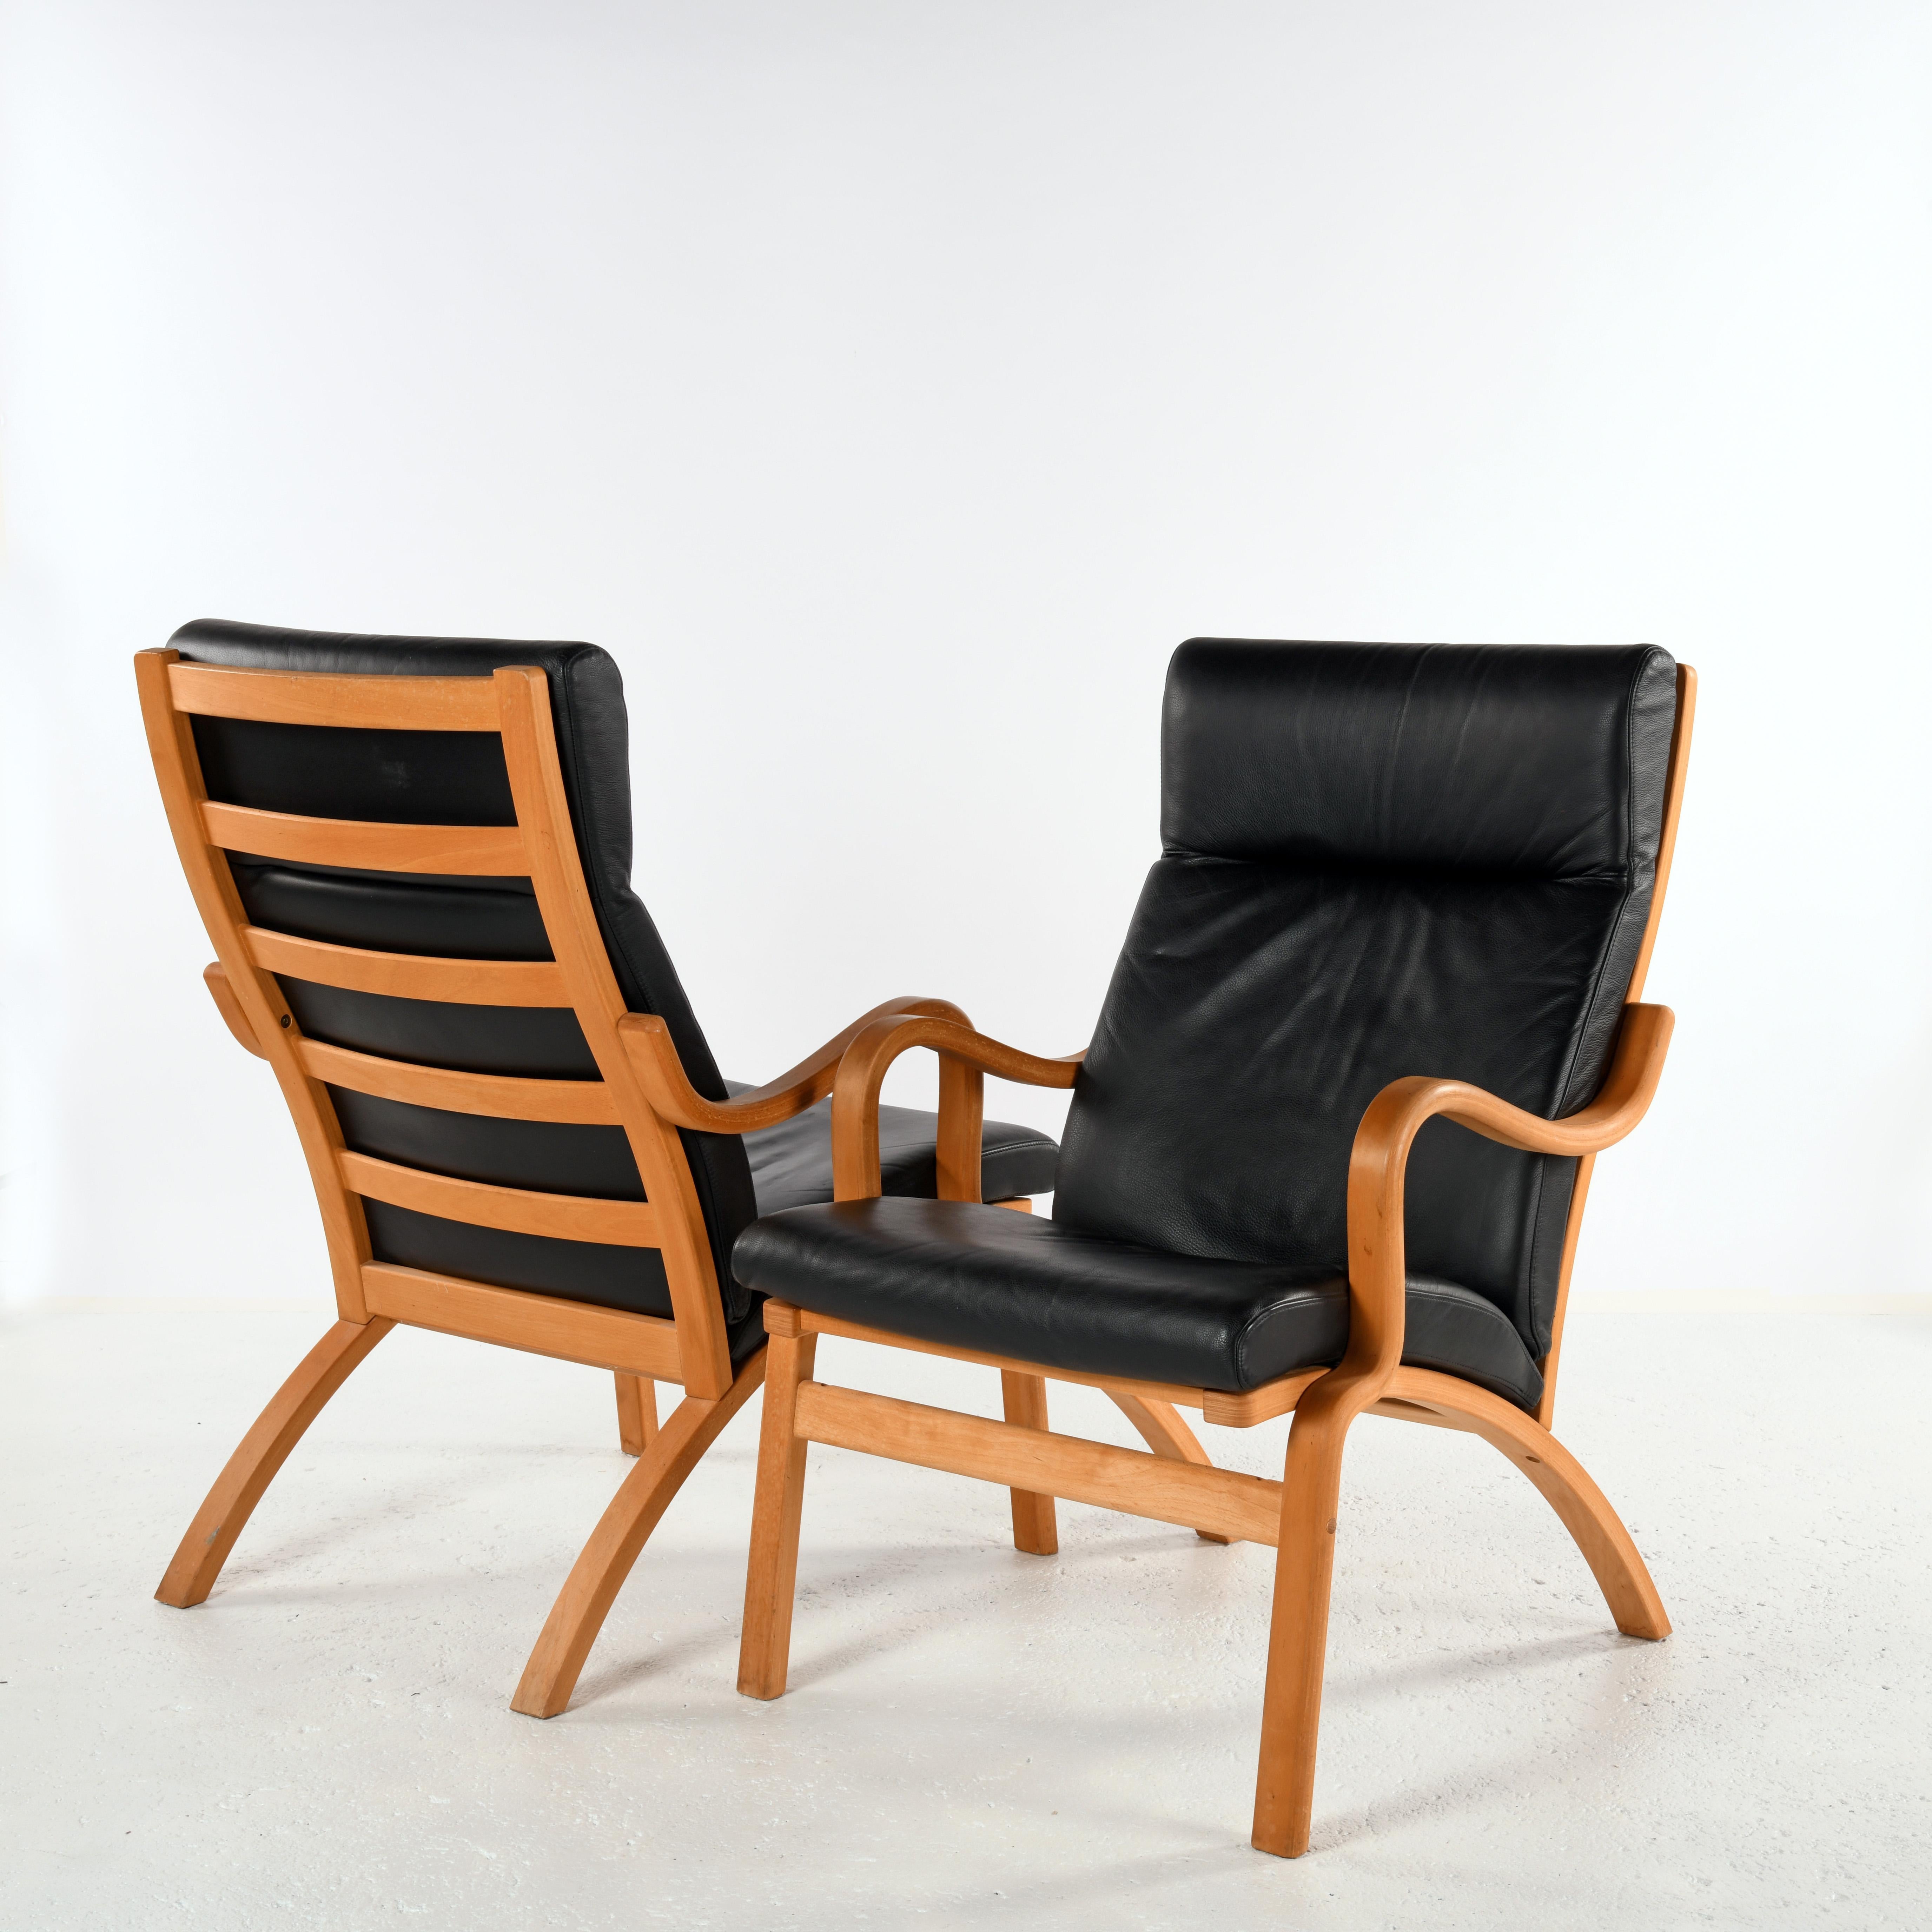 Pair of armchairs produced by Stouby in Denmark. Curved multi-ply beech and black leather, early 20th century edition in perfect condition.  Lightweight, they are easy to move. The high backrest provides excellent back and head support.
The Stouby